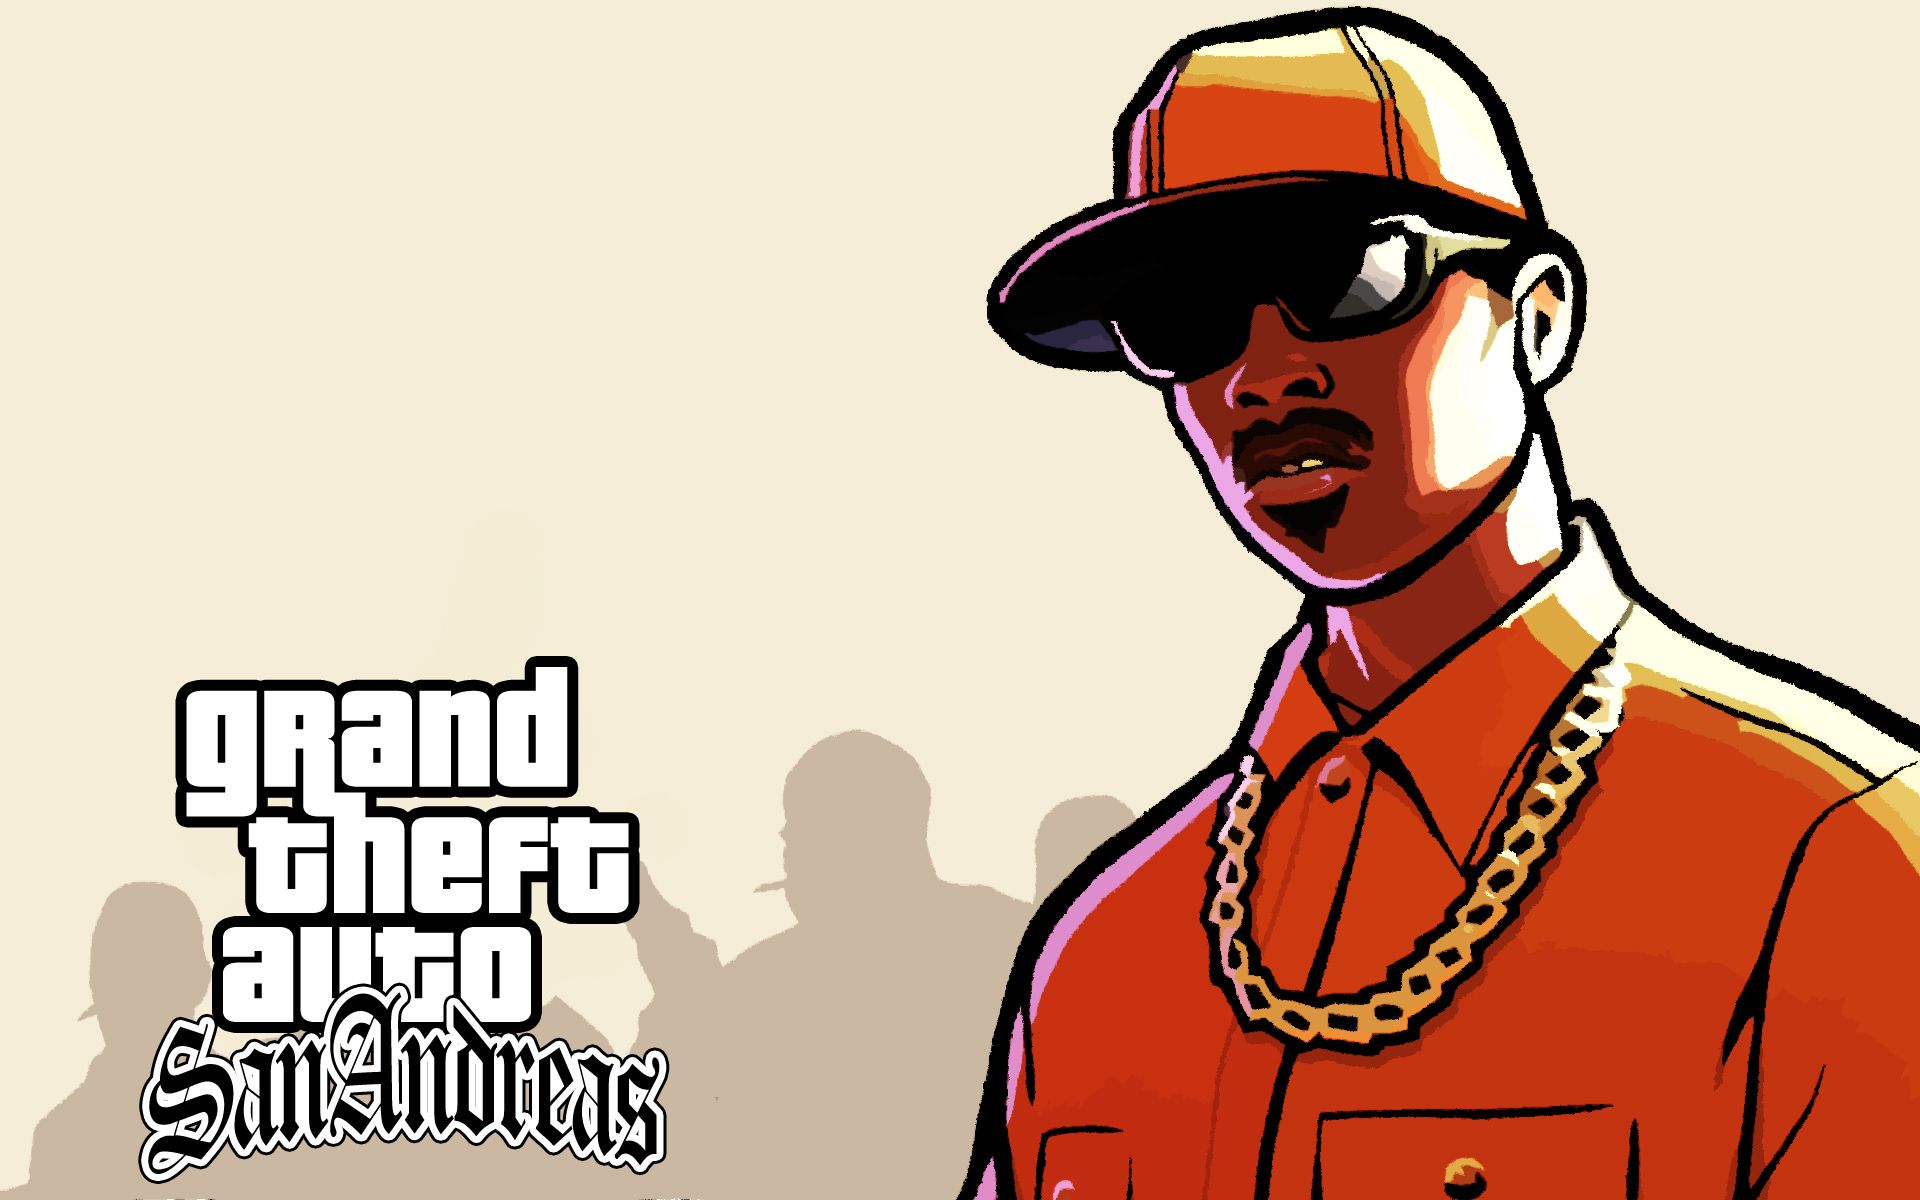 Grand-Theft-Auto-San-Andreas-Game-Wallpapers.jpg